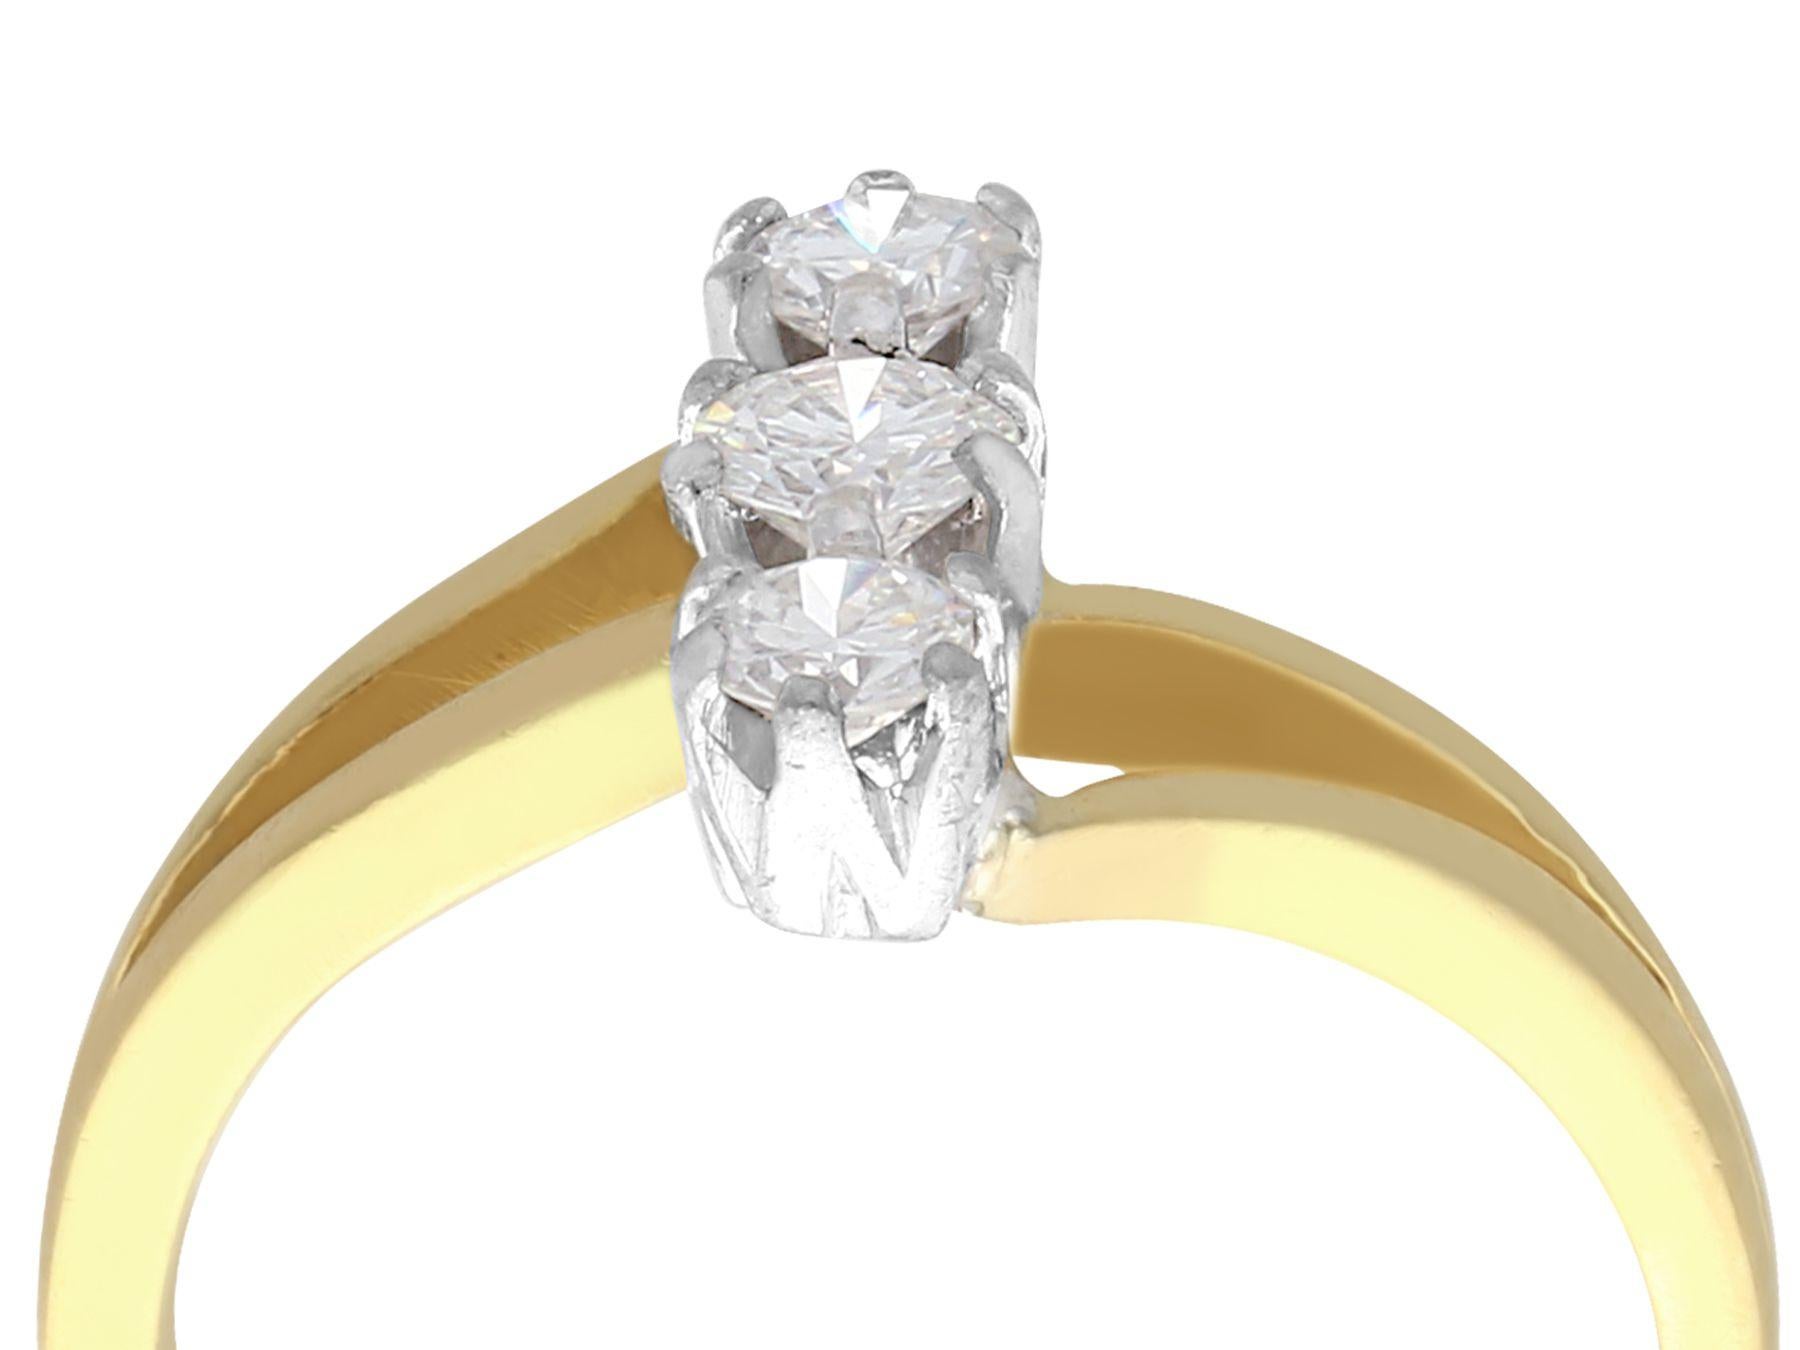 A fine contemporary 0.20 carat diamond, 18 karat yellow gold, 18 karat white gold set, Art Nouveau style dress ring; part of our diverse contemporary jewellery collection.

This fine contemporary Art Nouveau style three stone ring has been crafted